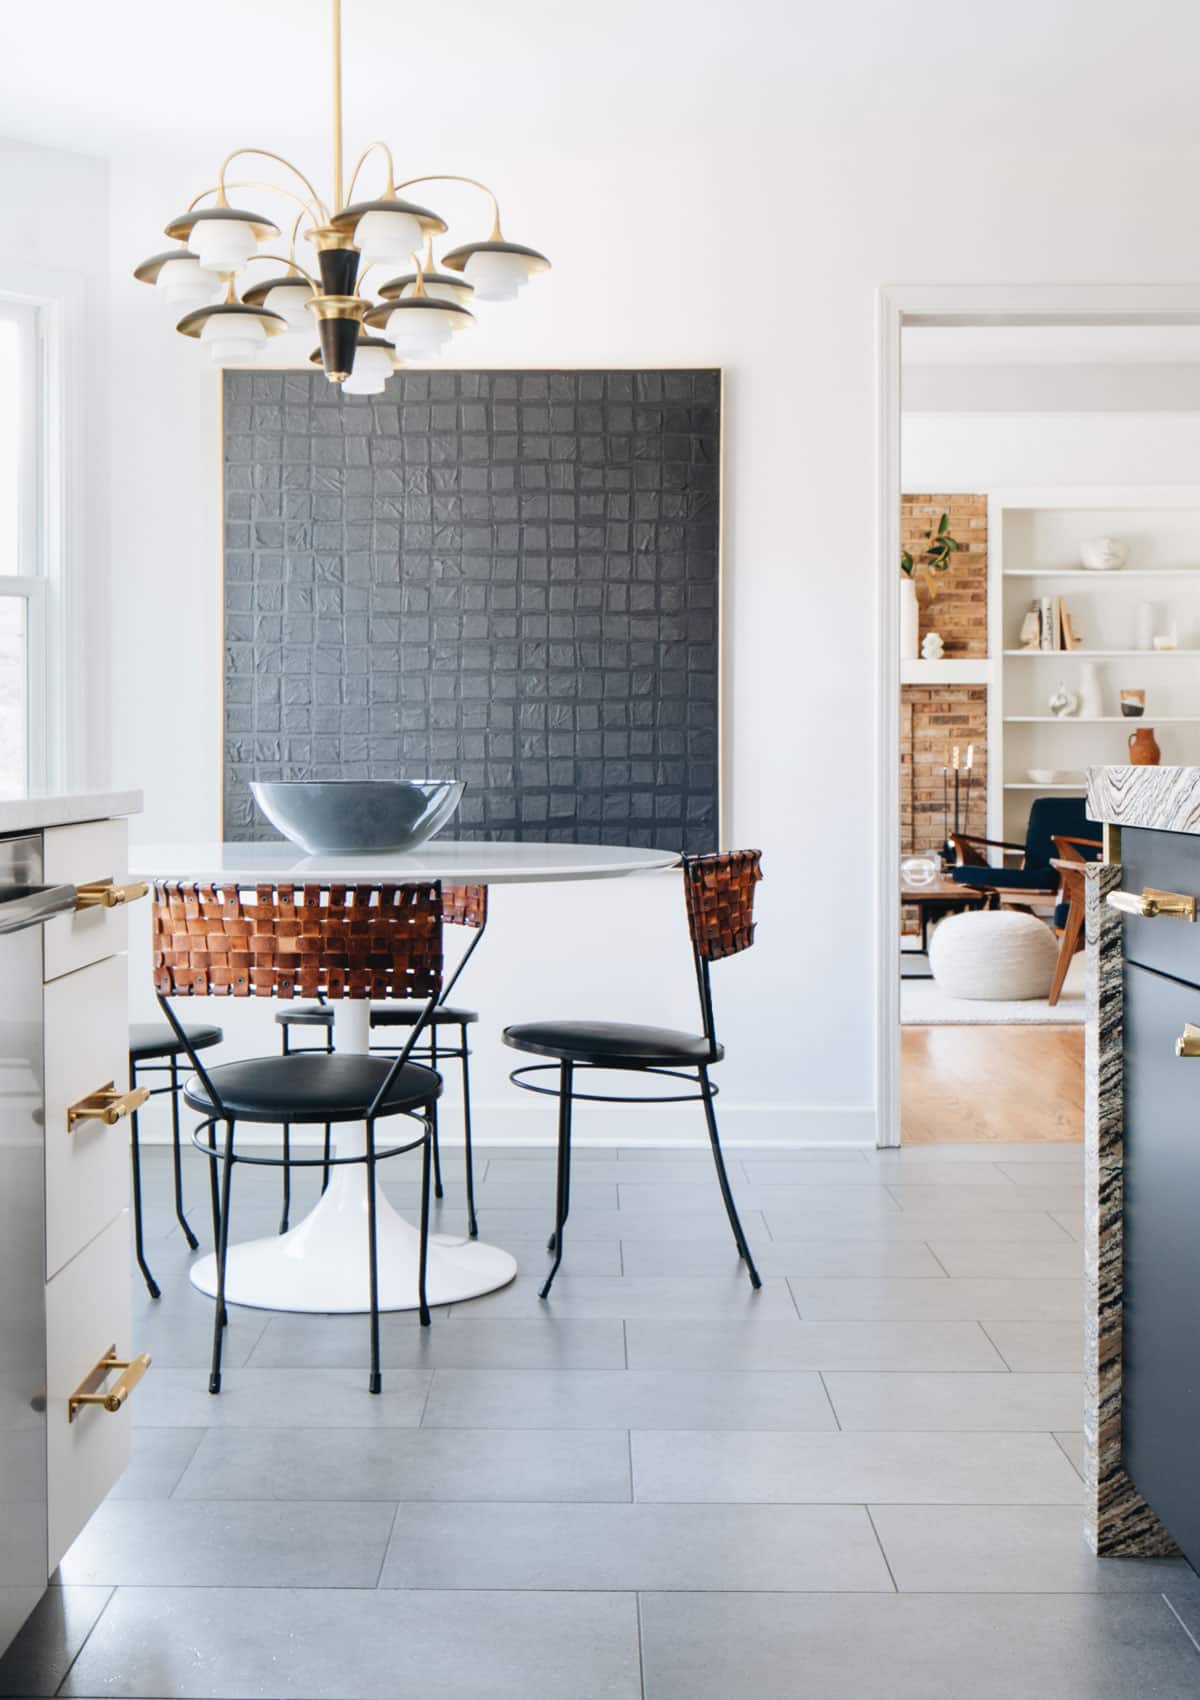 White kitchens are not out, here's why